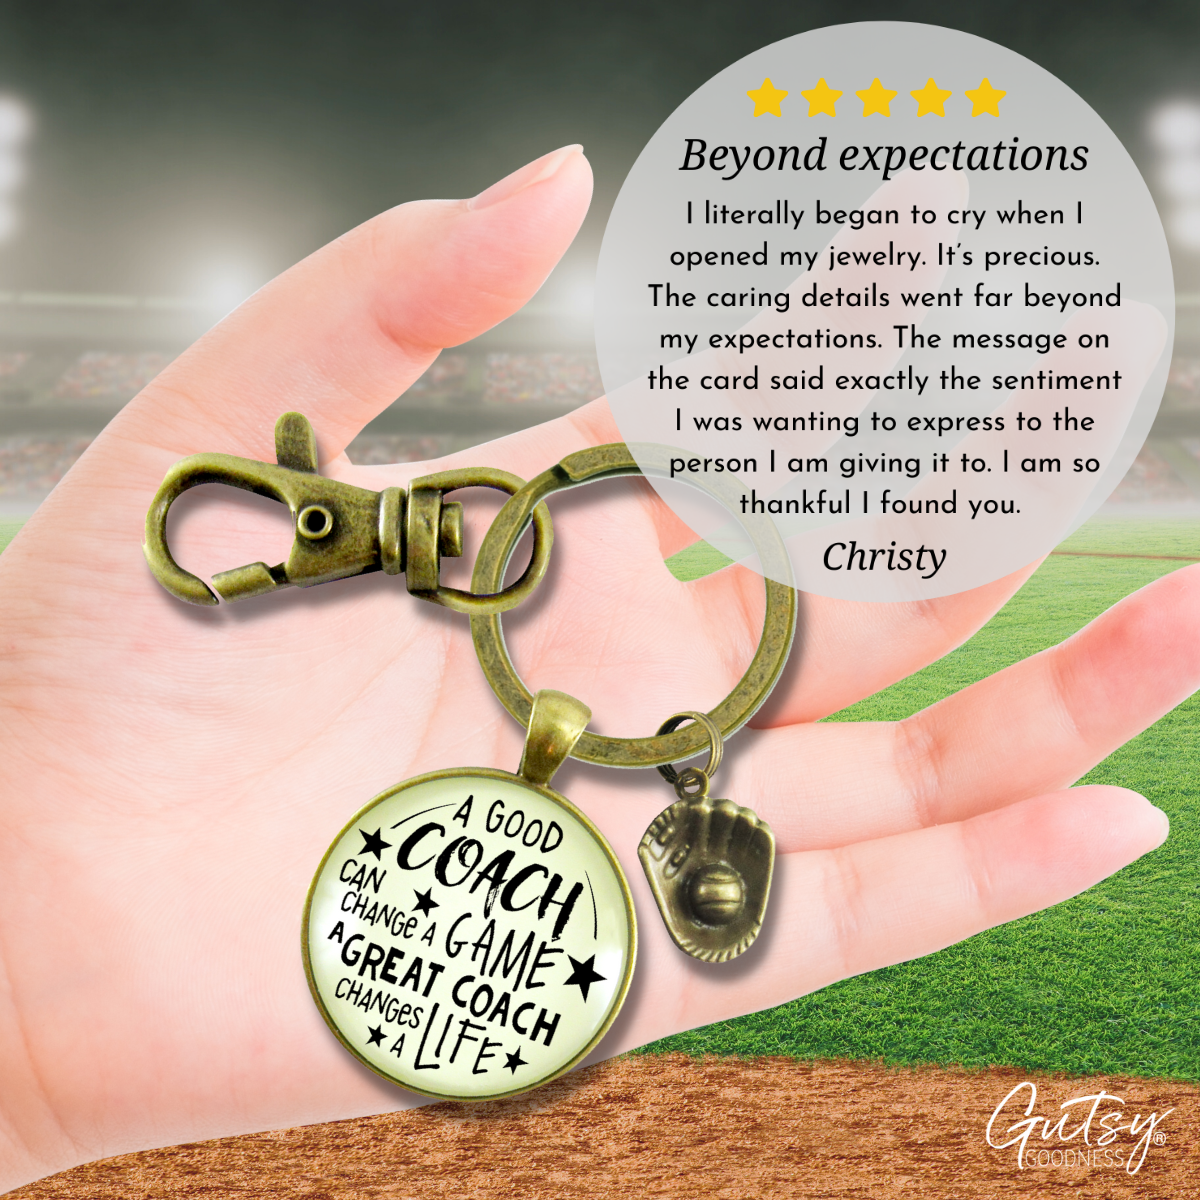 Softball Coaching Sport Keychain Great Coach Changes Life Thank You Gift - Gutsy Goodness Handmade Jewelry;Softball Coaching Sport Keychain Great Coach Changes Life Thank You Gift - Gutsy Goodness Handmade Jewelry Gifts